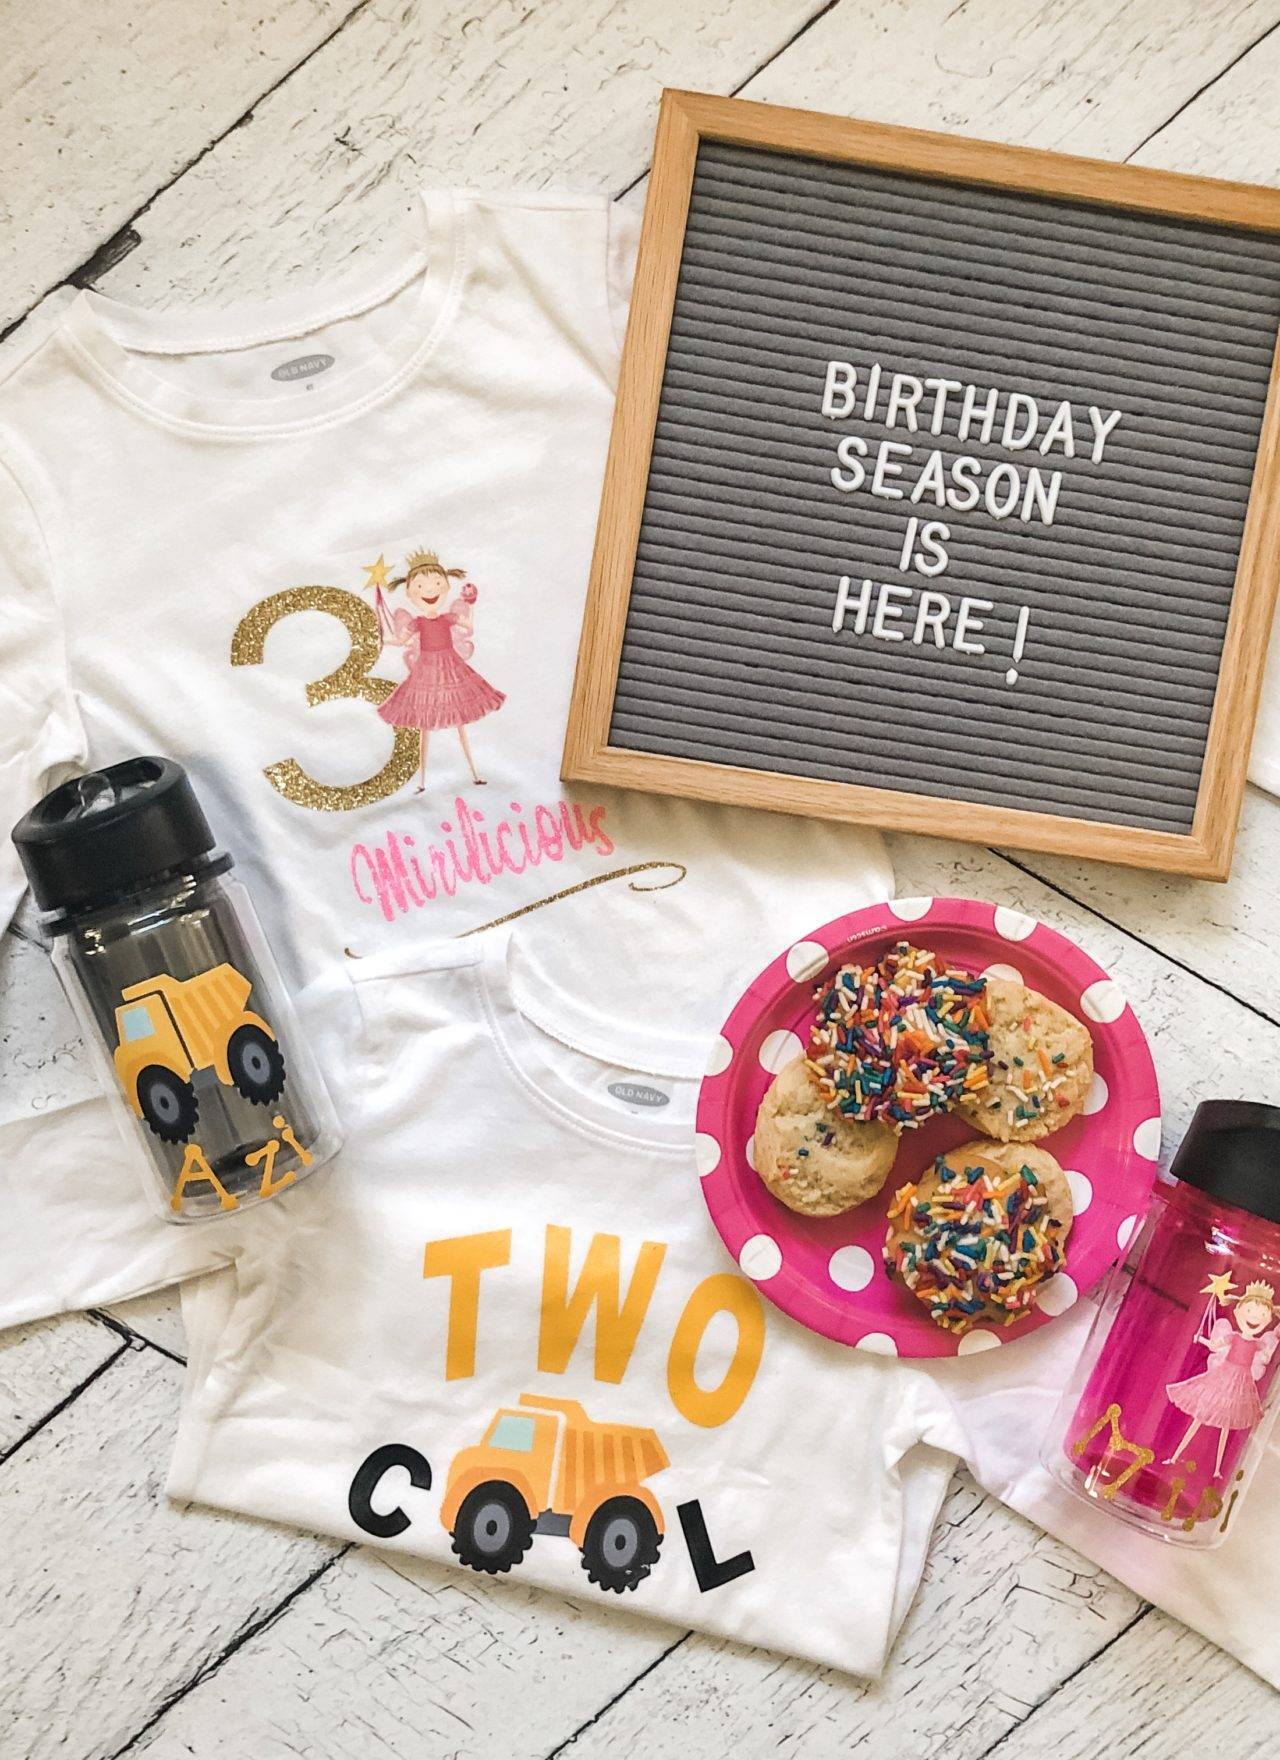 Our Family Birthday Traditions and the Kids’ Birthday Wishlists